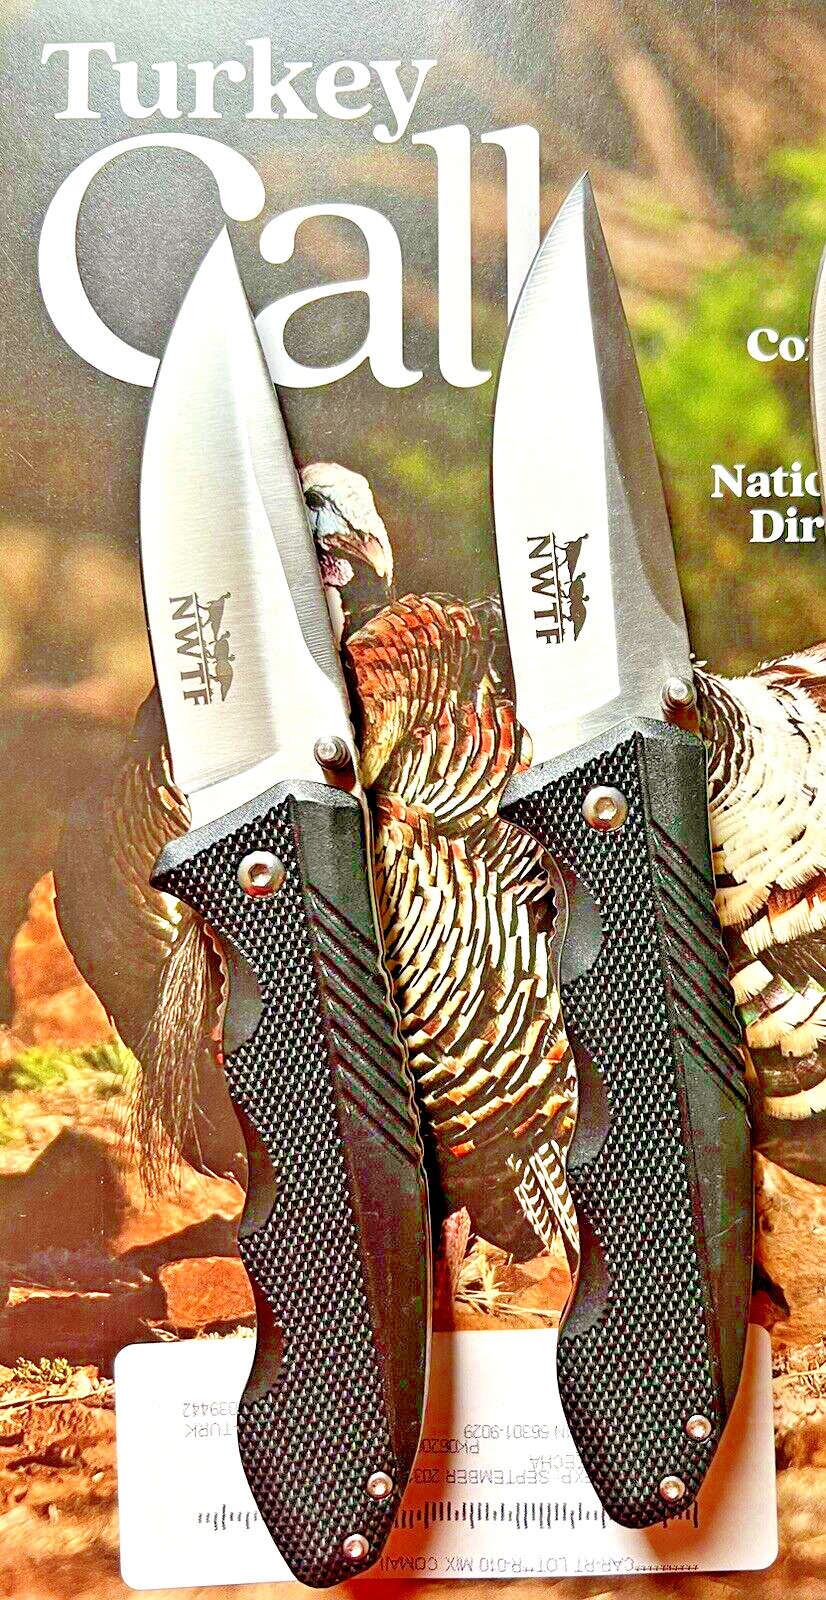 NWTF Stainless Steel Blade  Knife 3.5” Blade black nylon Browning Sheath New